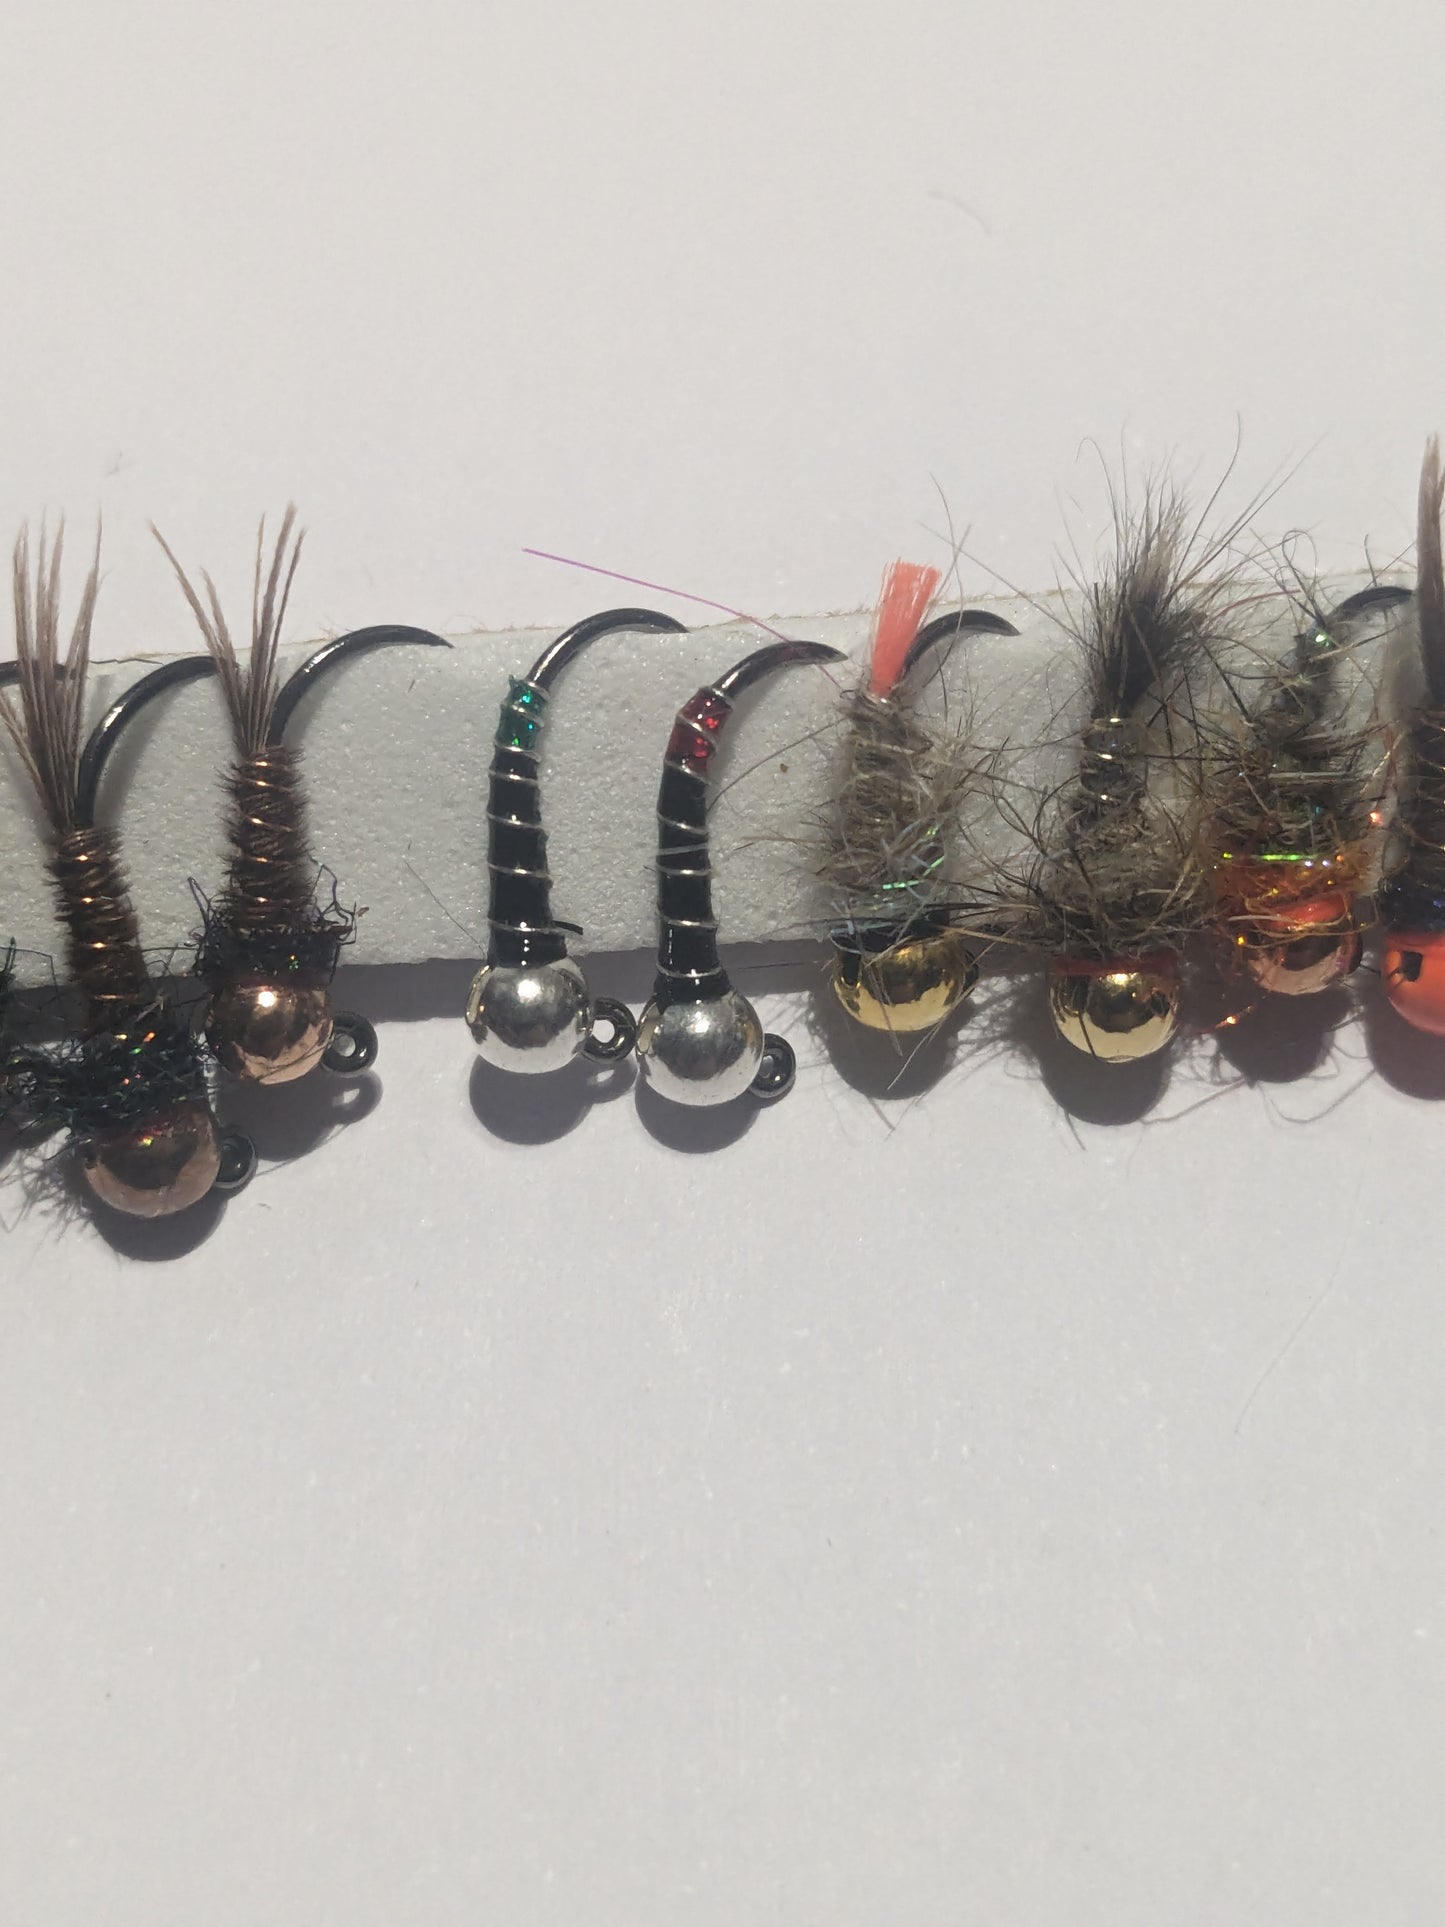 Beaded Nymphs for Salmon and Trout by Michael Currie Fly Tying - www.nafni.com